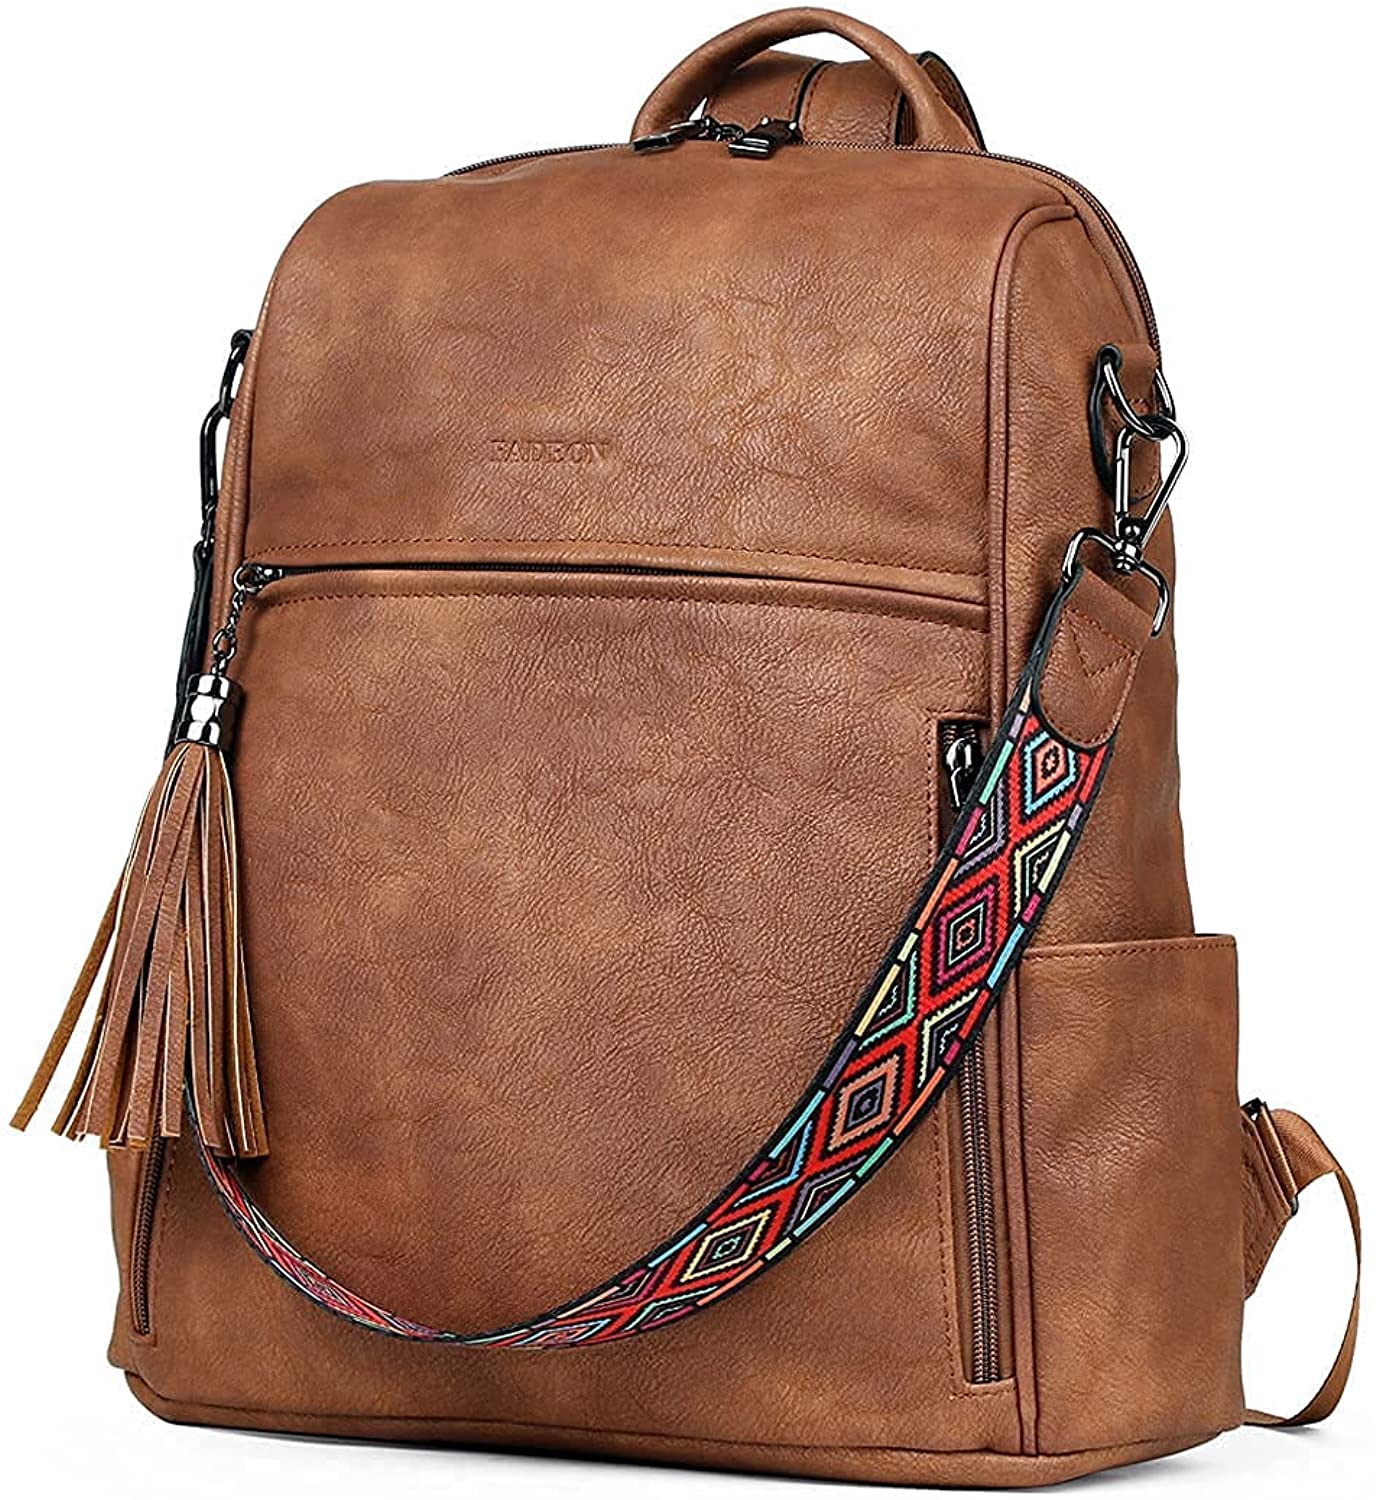 The Leather Backpack: Designer Brown Leather Backpack